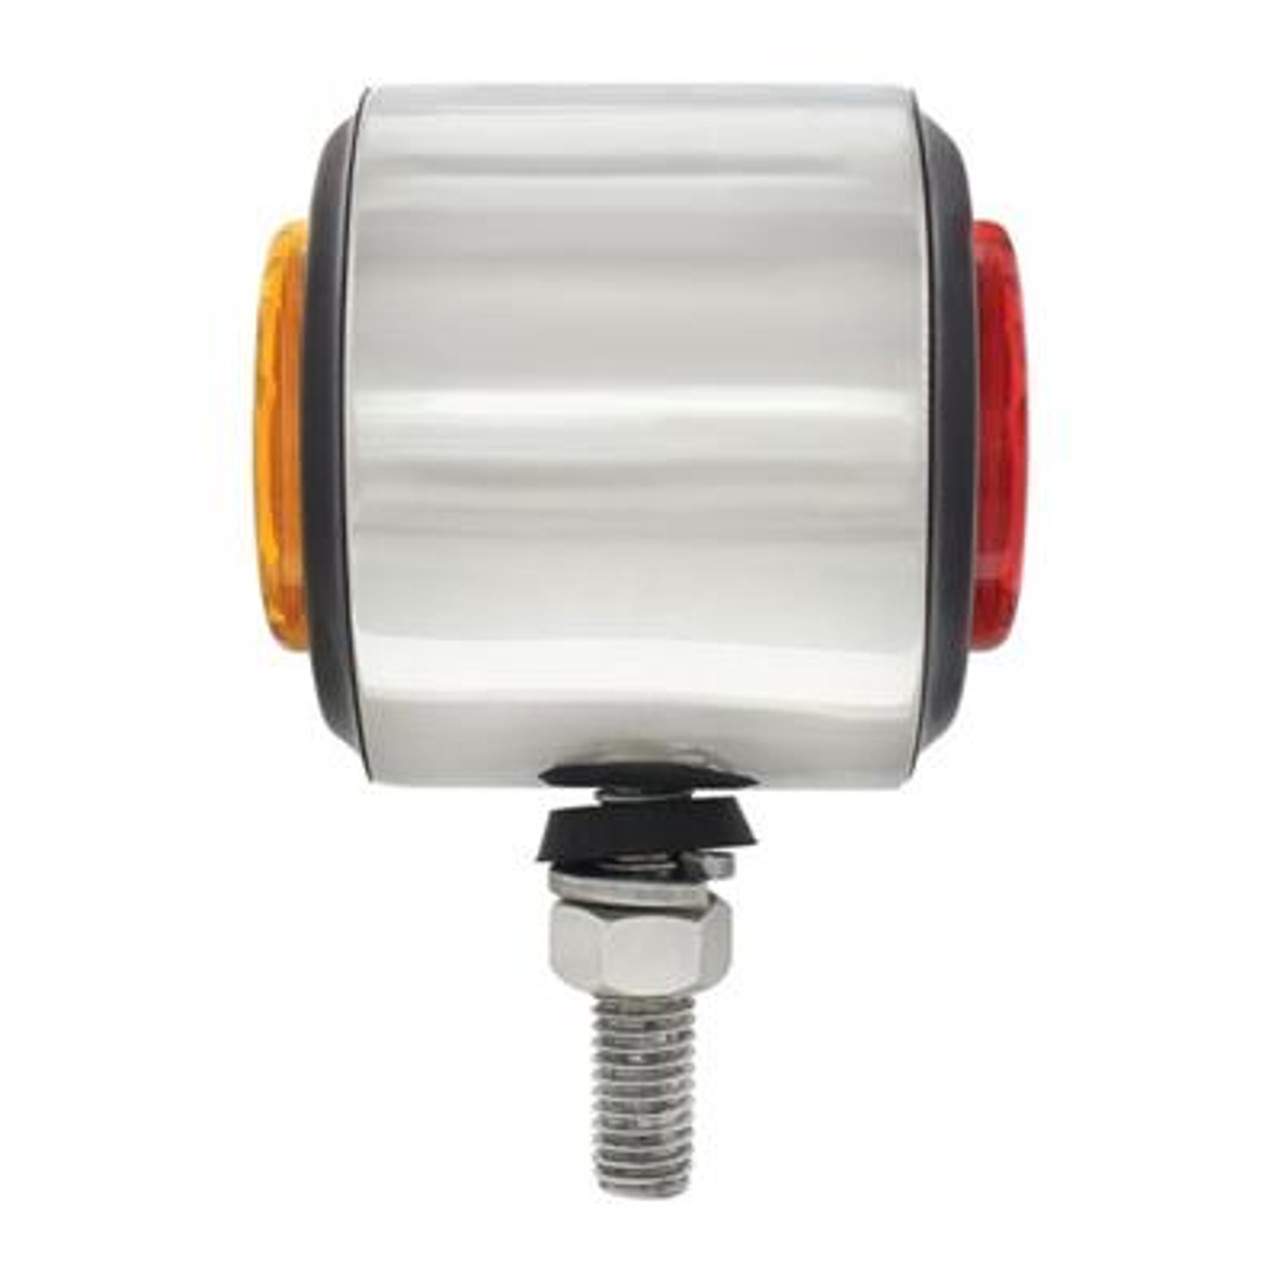 SS 2" Double Face Light With 9 LED 2" Lights & Grommets - Amber & Red LED/Amber & Red Lens